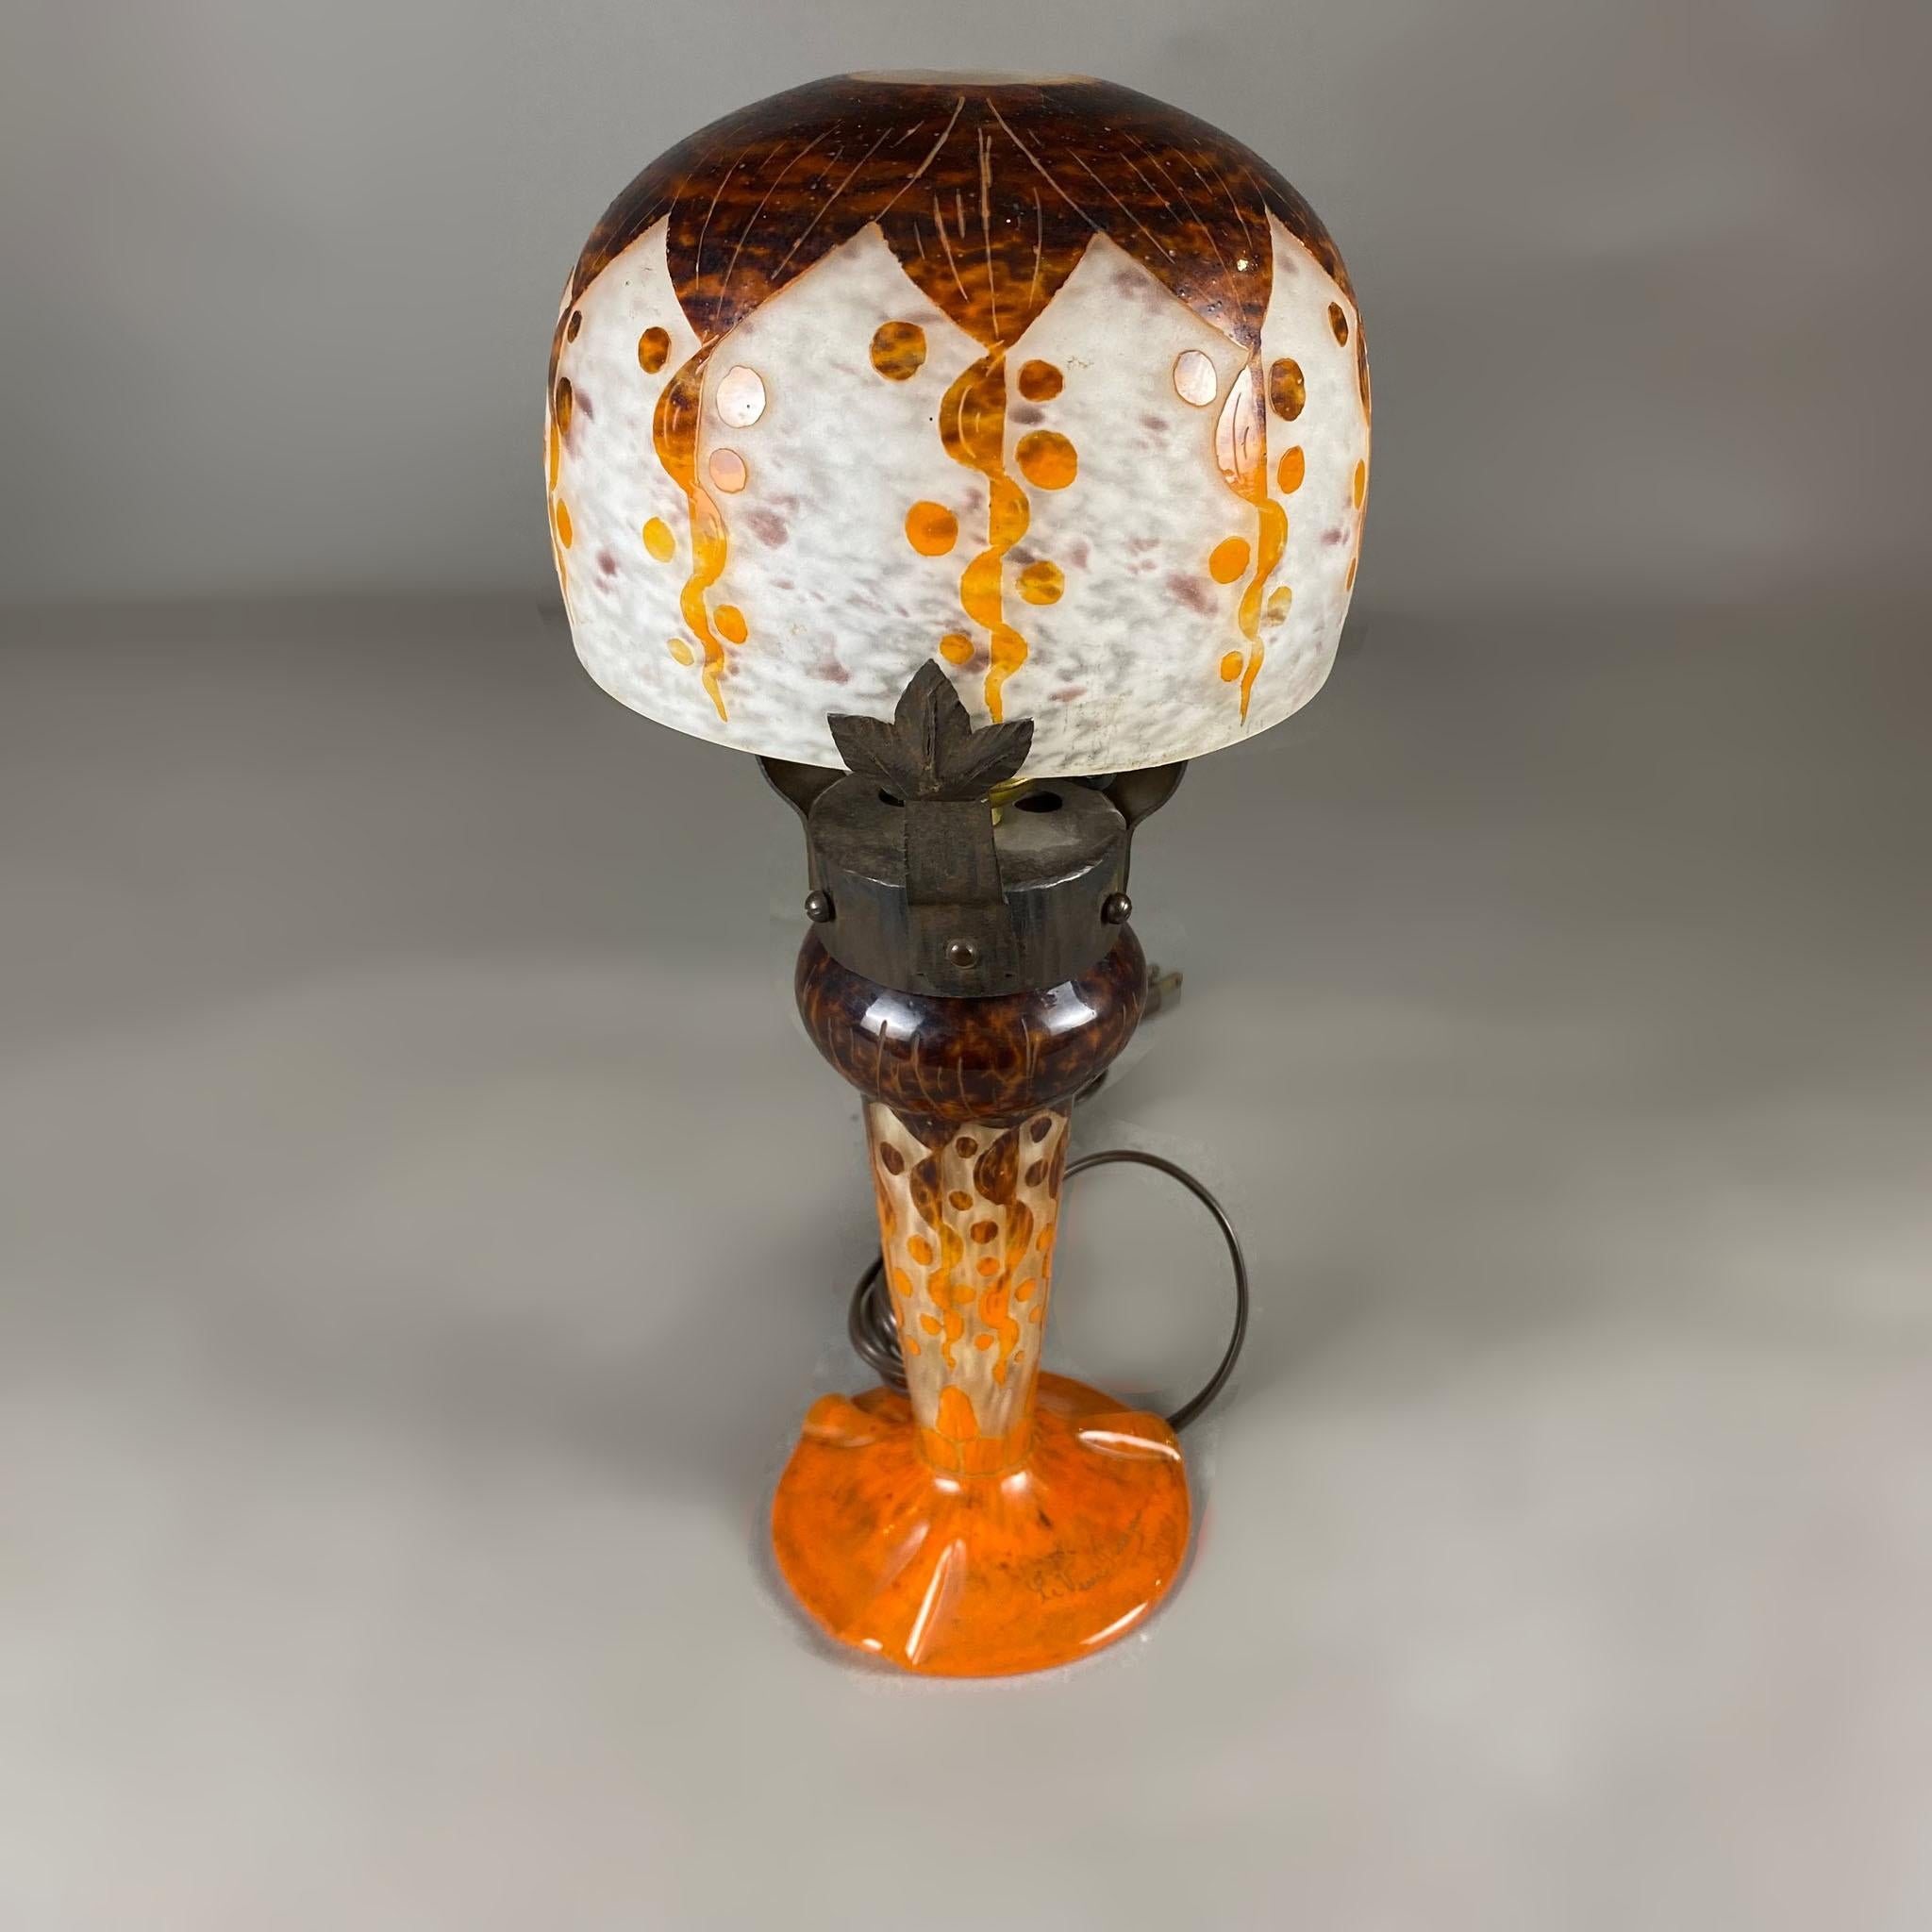 A 1920's French Le Verre Français cameo glass and iron hardware Rubaniers table lamp. The iron hardware joins the lamp's two cameo glass section: the upper screen in white, brown and orange and the base in orange and brown with tortoiseshell finish.